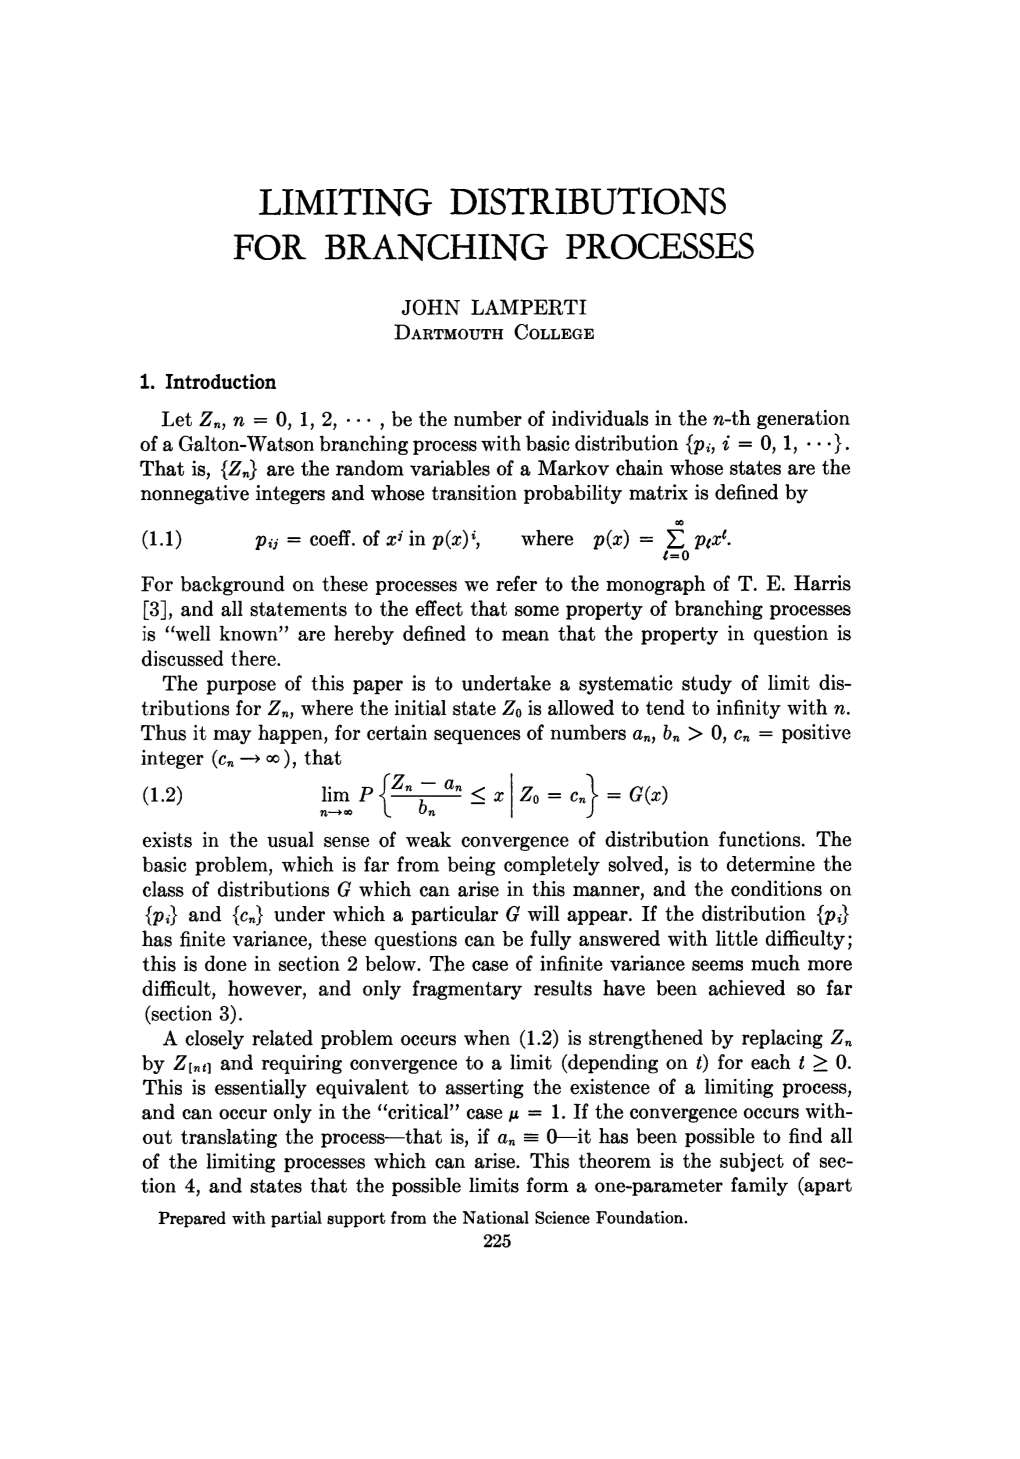 Limiting Distributions for Branching Processes